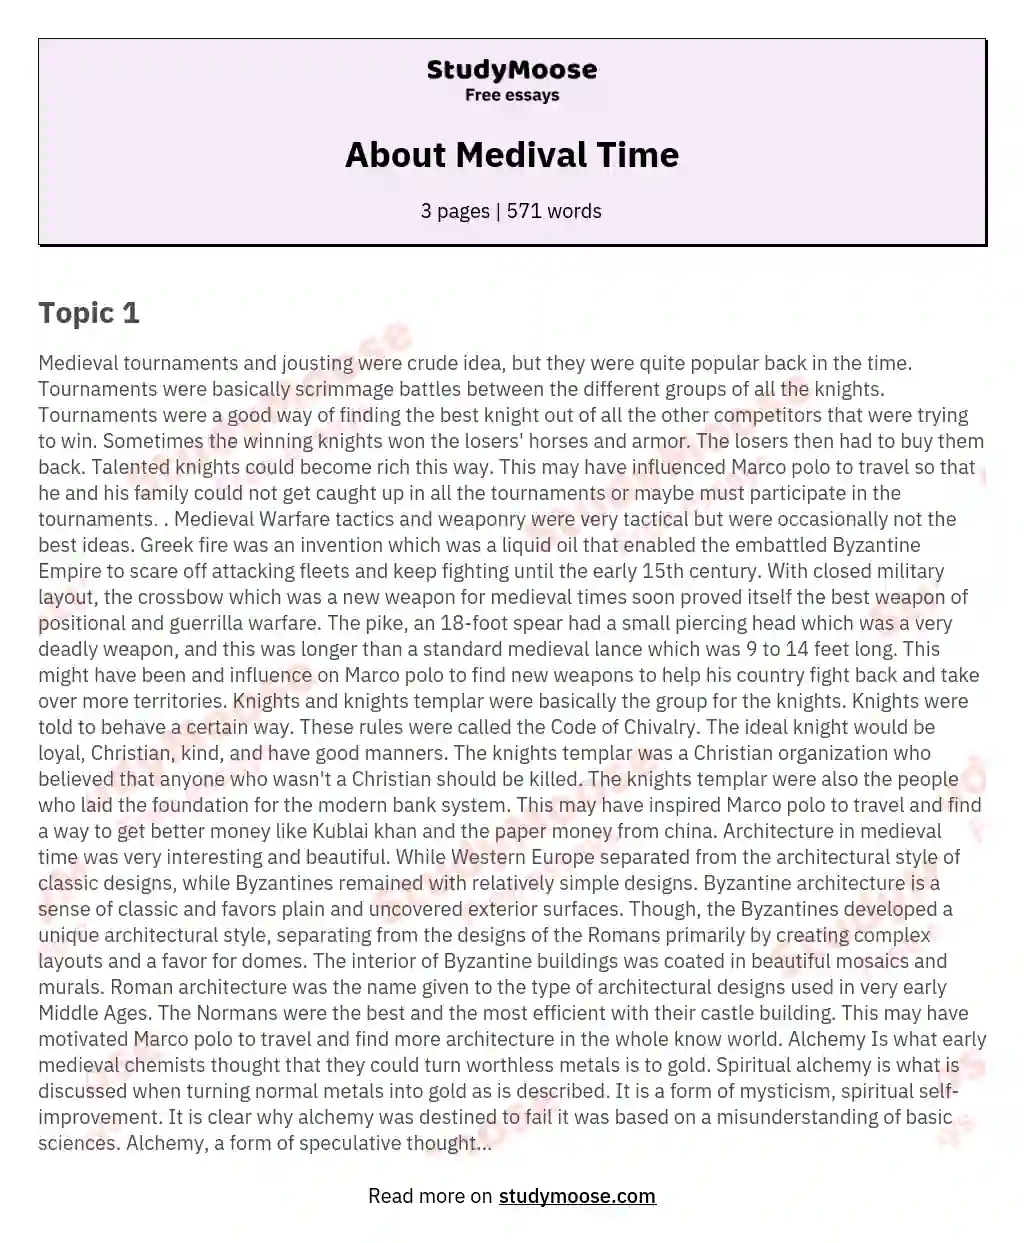 About Medival Time essay